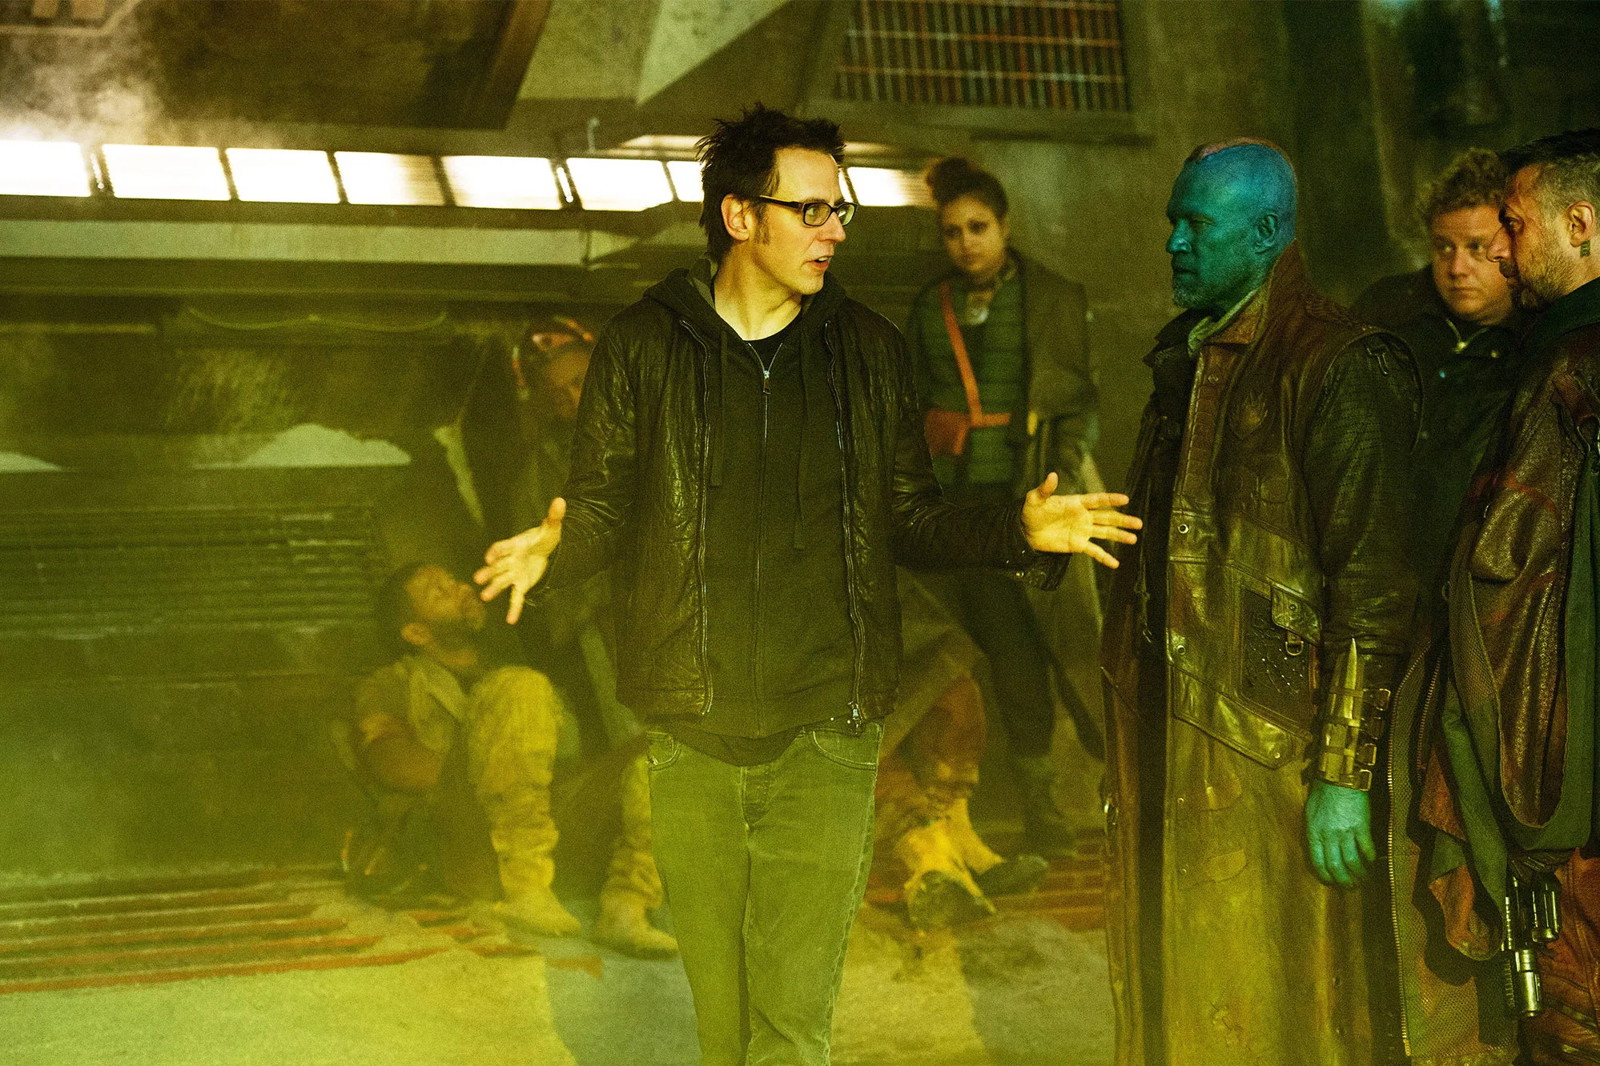 James Gunn on the sets of Guardians of the Galaxy franchise.